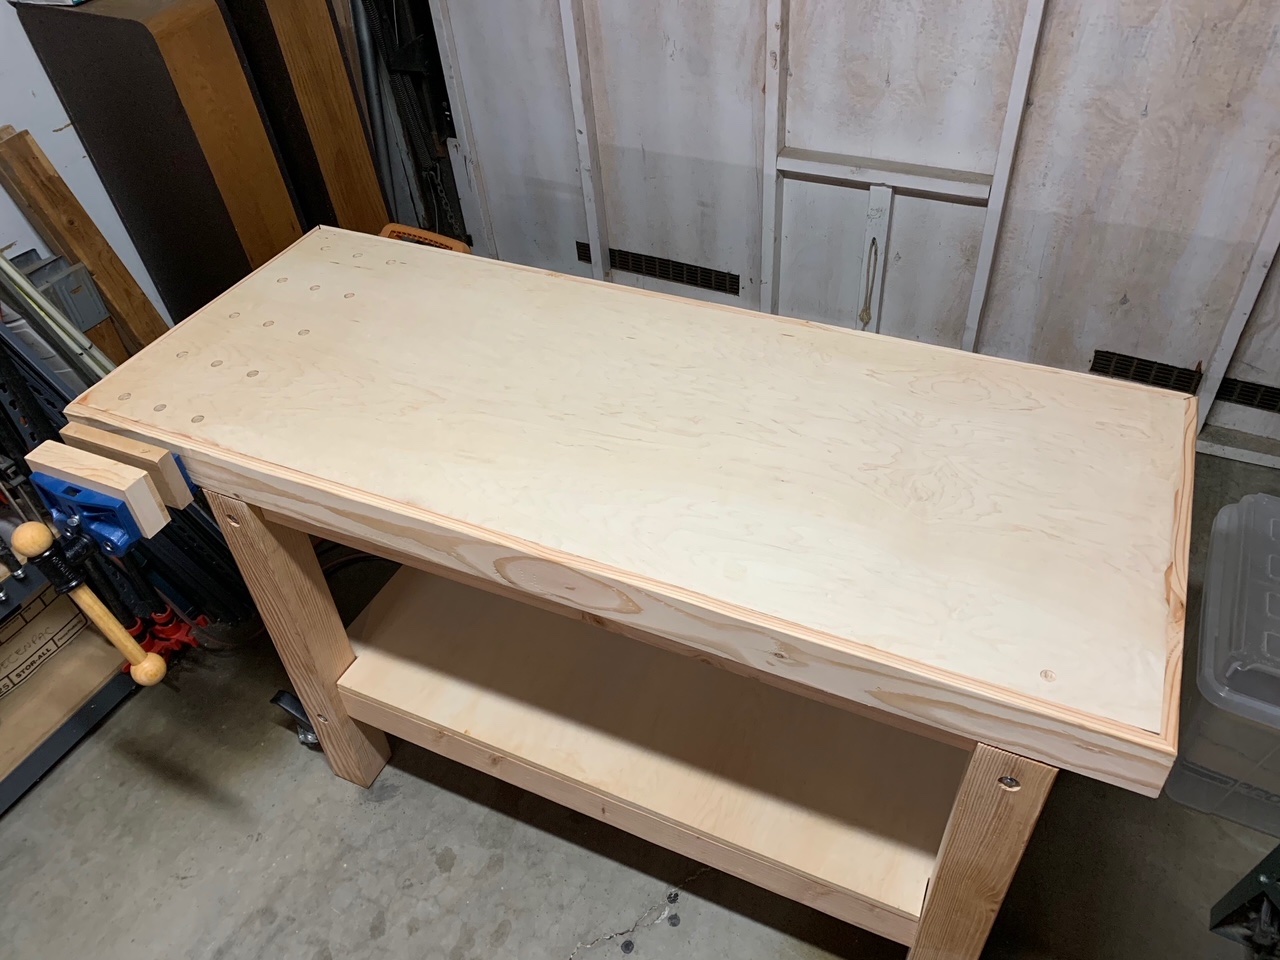 Finishing a woodworking bench - Shopsmith Forums